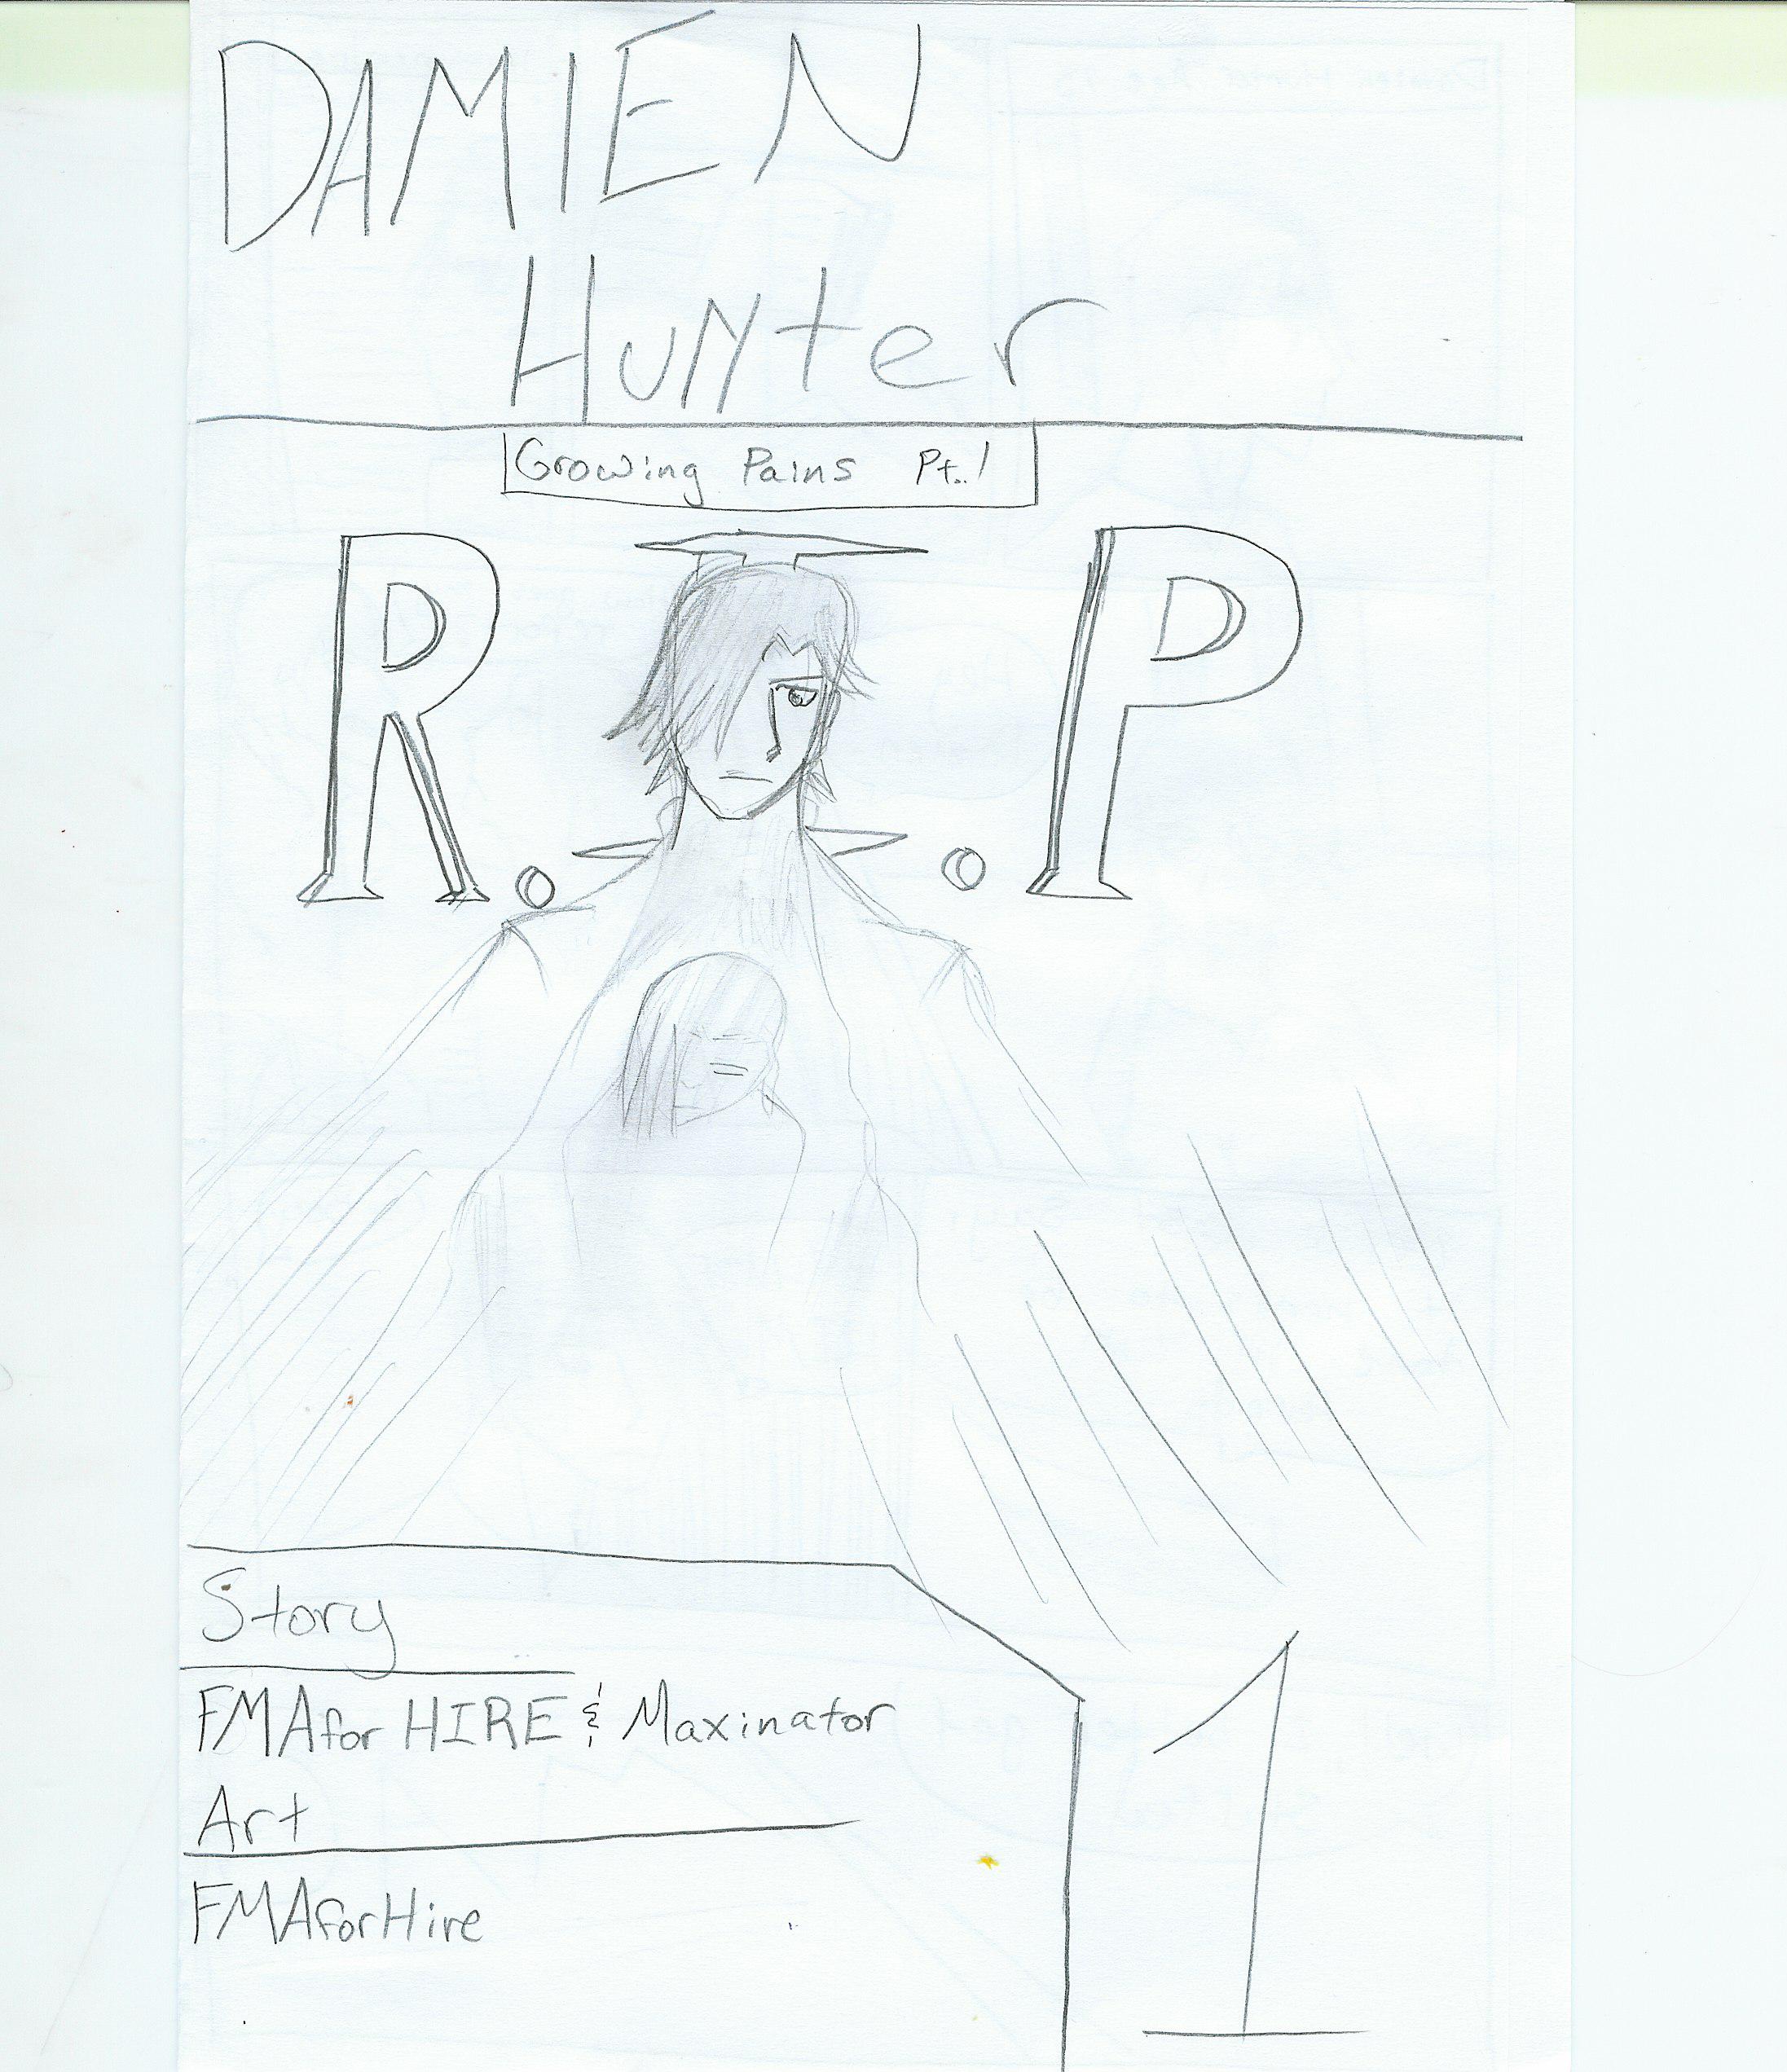 Damien Hunter Issue 1 by FMAforHIRE